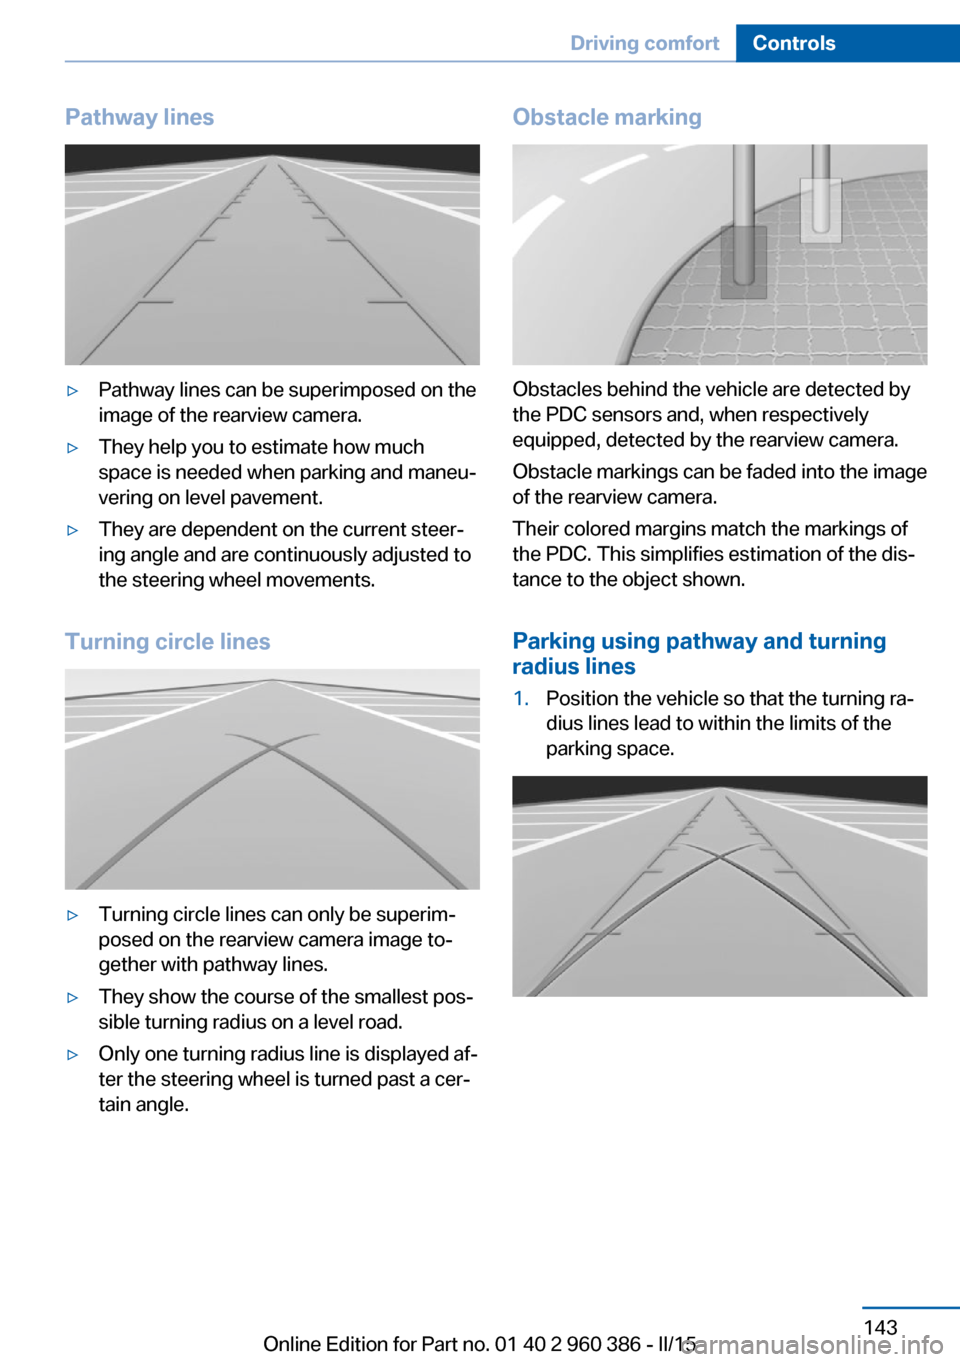 BMW X3 2015 F25 Manual PDF Pathway lines▷Pathway lines can be superimposed on the
image of the rearview camera.▷They help you to estimate how much
space is needed when parking and maneu‐
vering on level pavement.▷They a